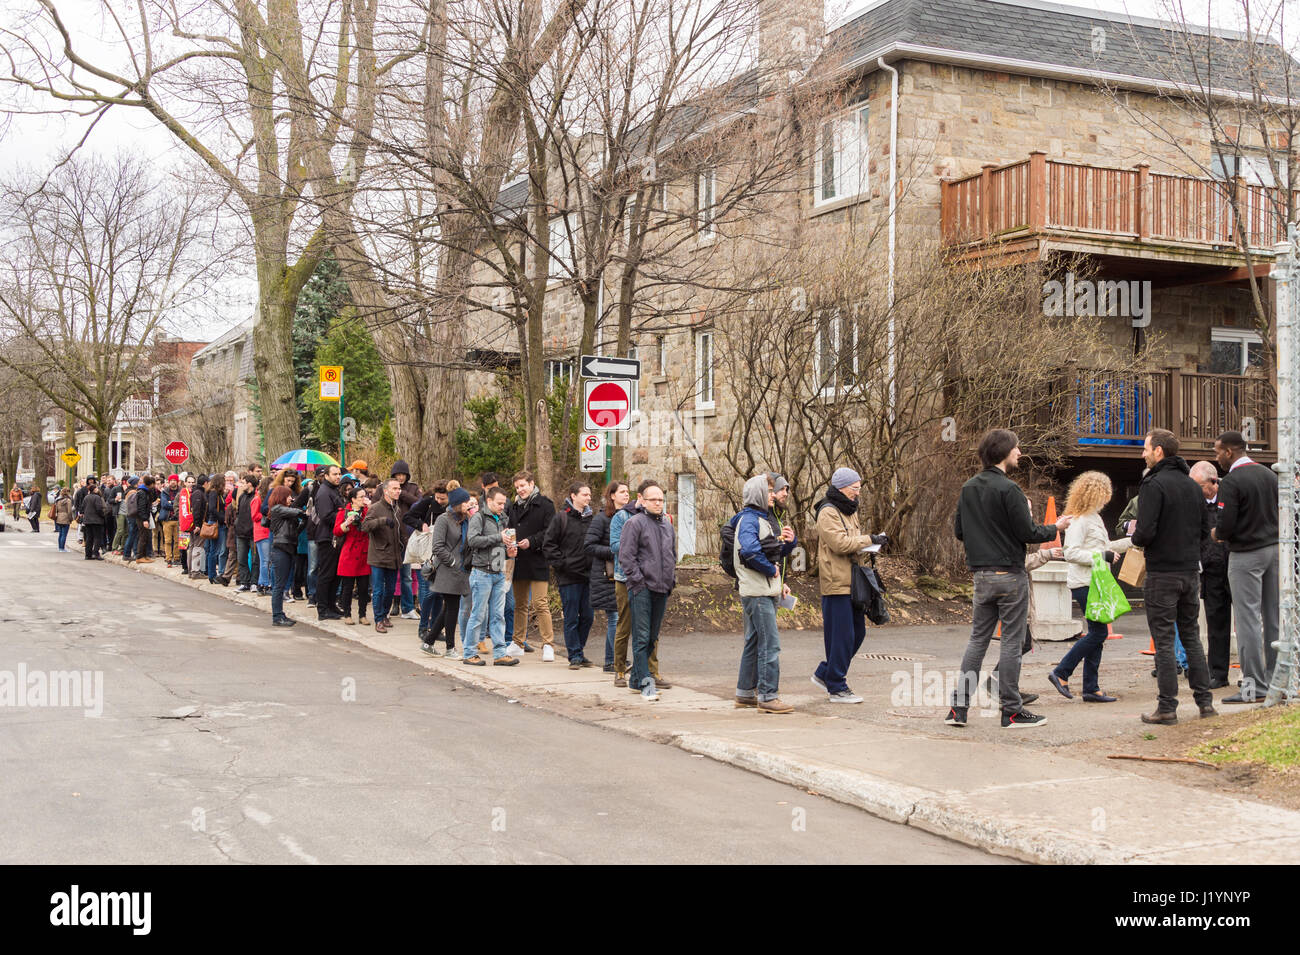 Montreal, CA - 22 April 2017: French nationals in Montreal are lining up at College Stanislas to cast their votes for the first round of the 2017 French presidential election. Credit: Marc Bruxelle/Alamy Live News Stock Photo